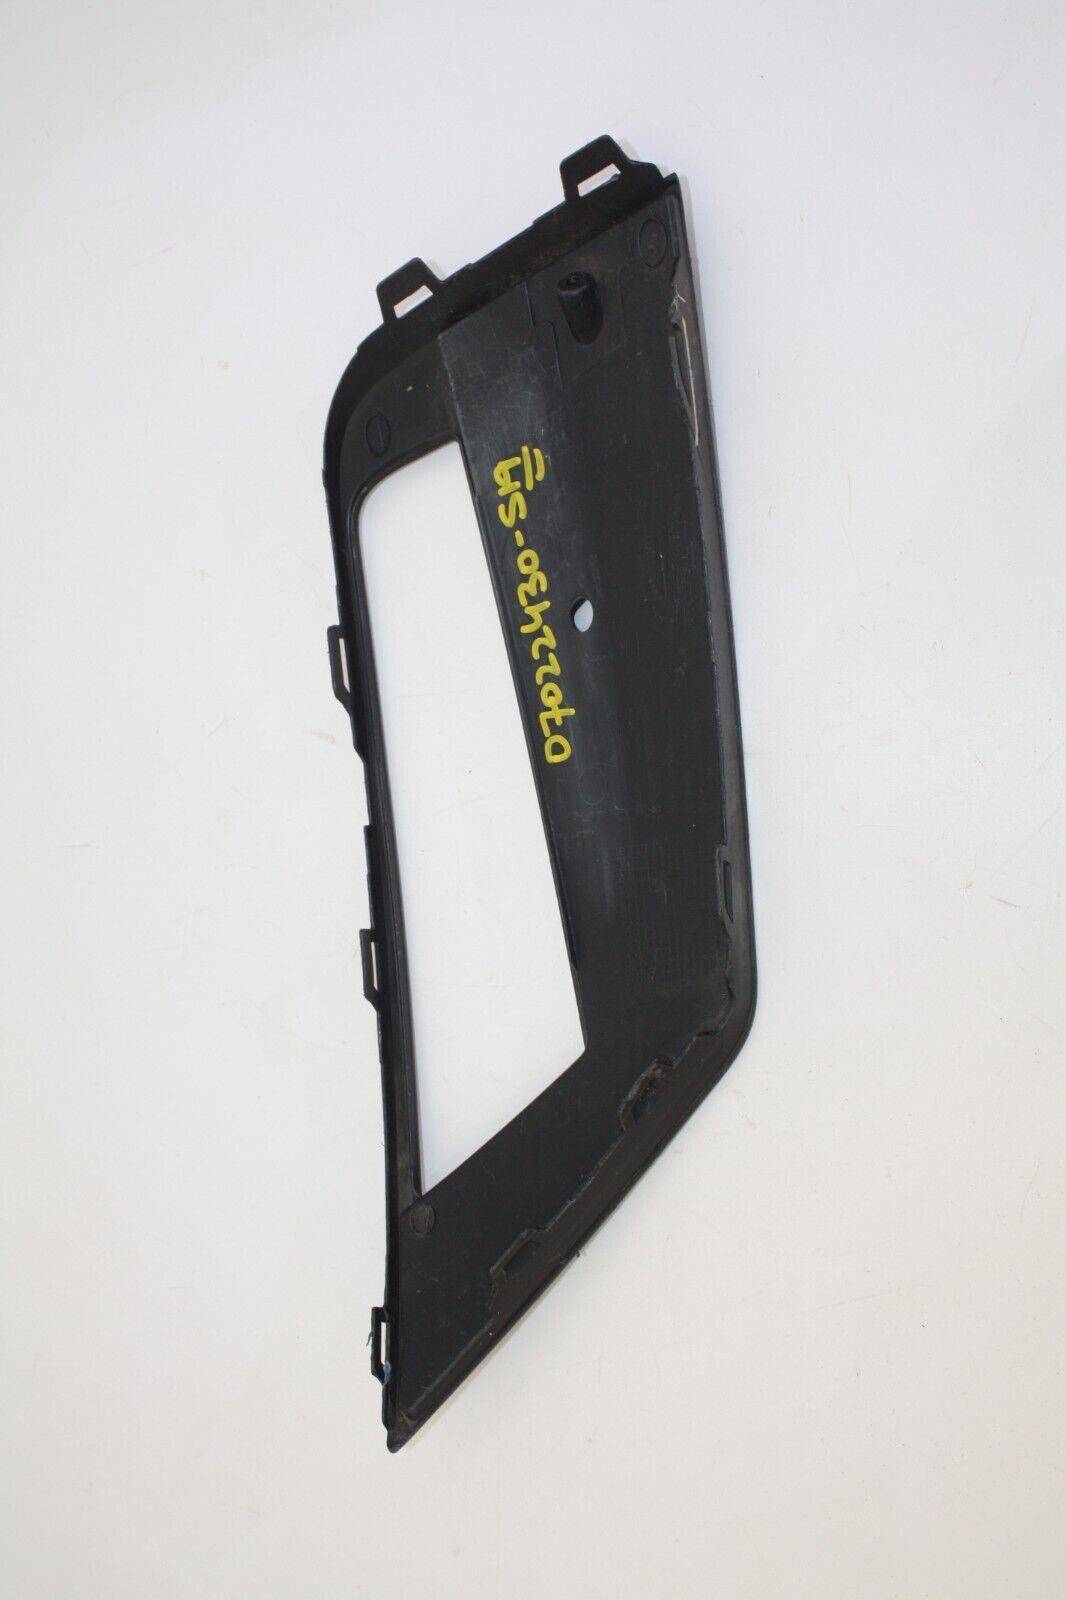 Seat-Leon-Front-Bumper-Right-Lower-Grill-2017-TO-2020-5F0853666G-Genuine-176228777988-6